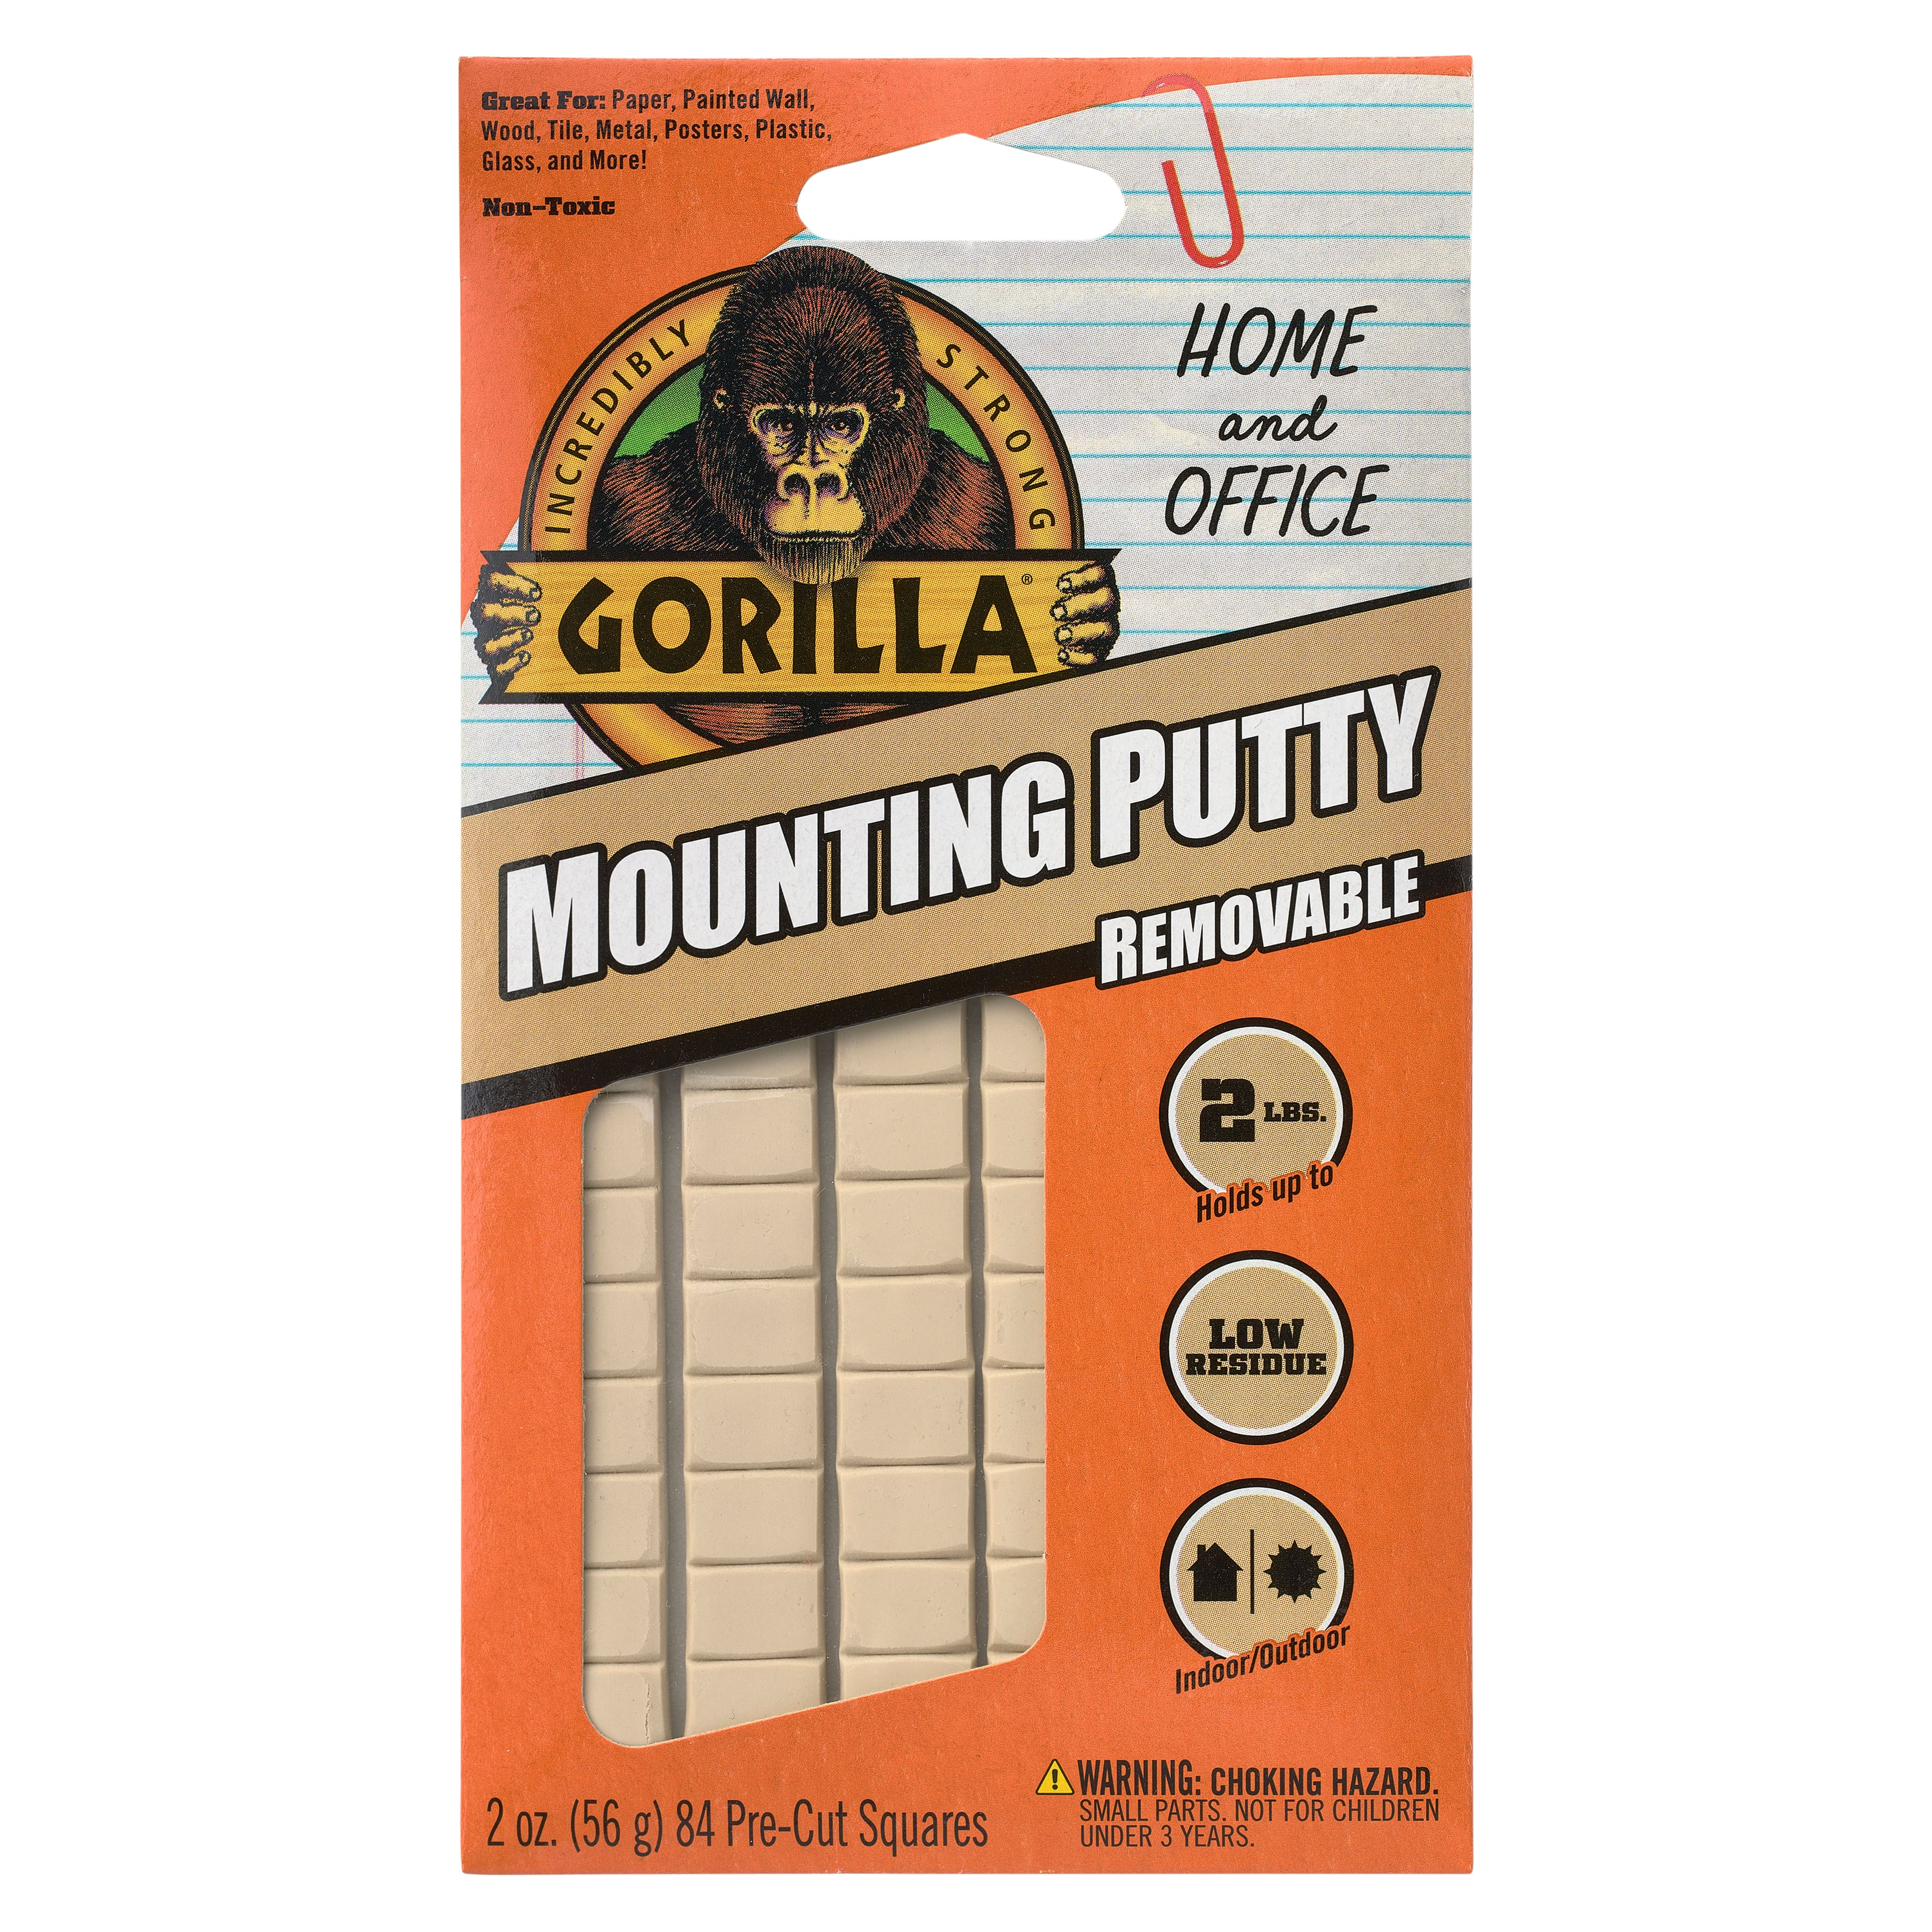 how to get gorilla mounting putty off walls｜TikTok Search